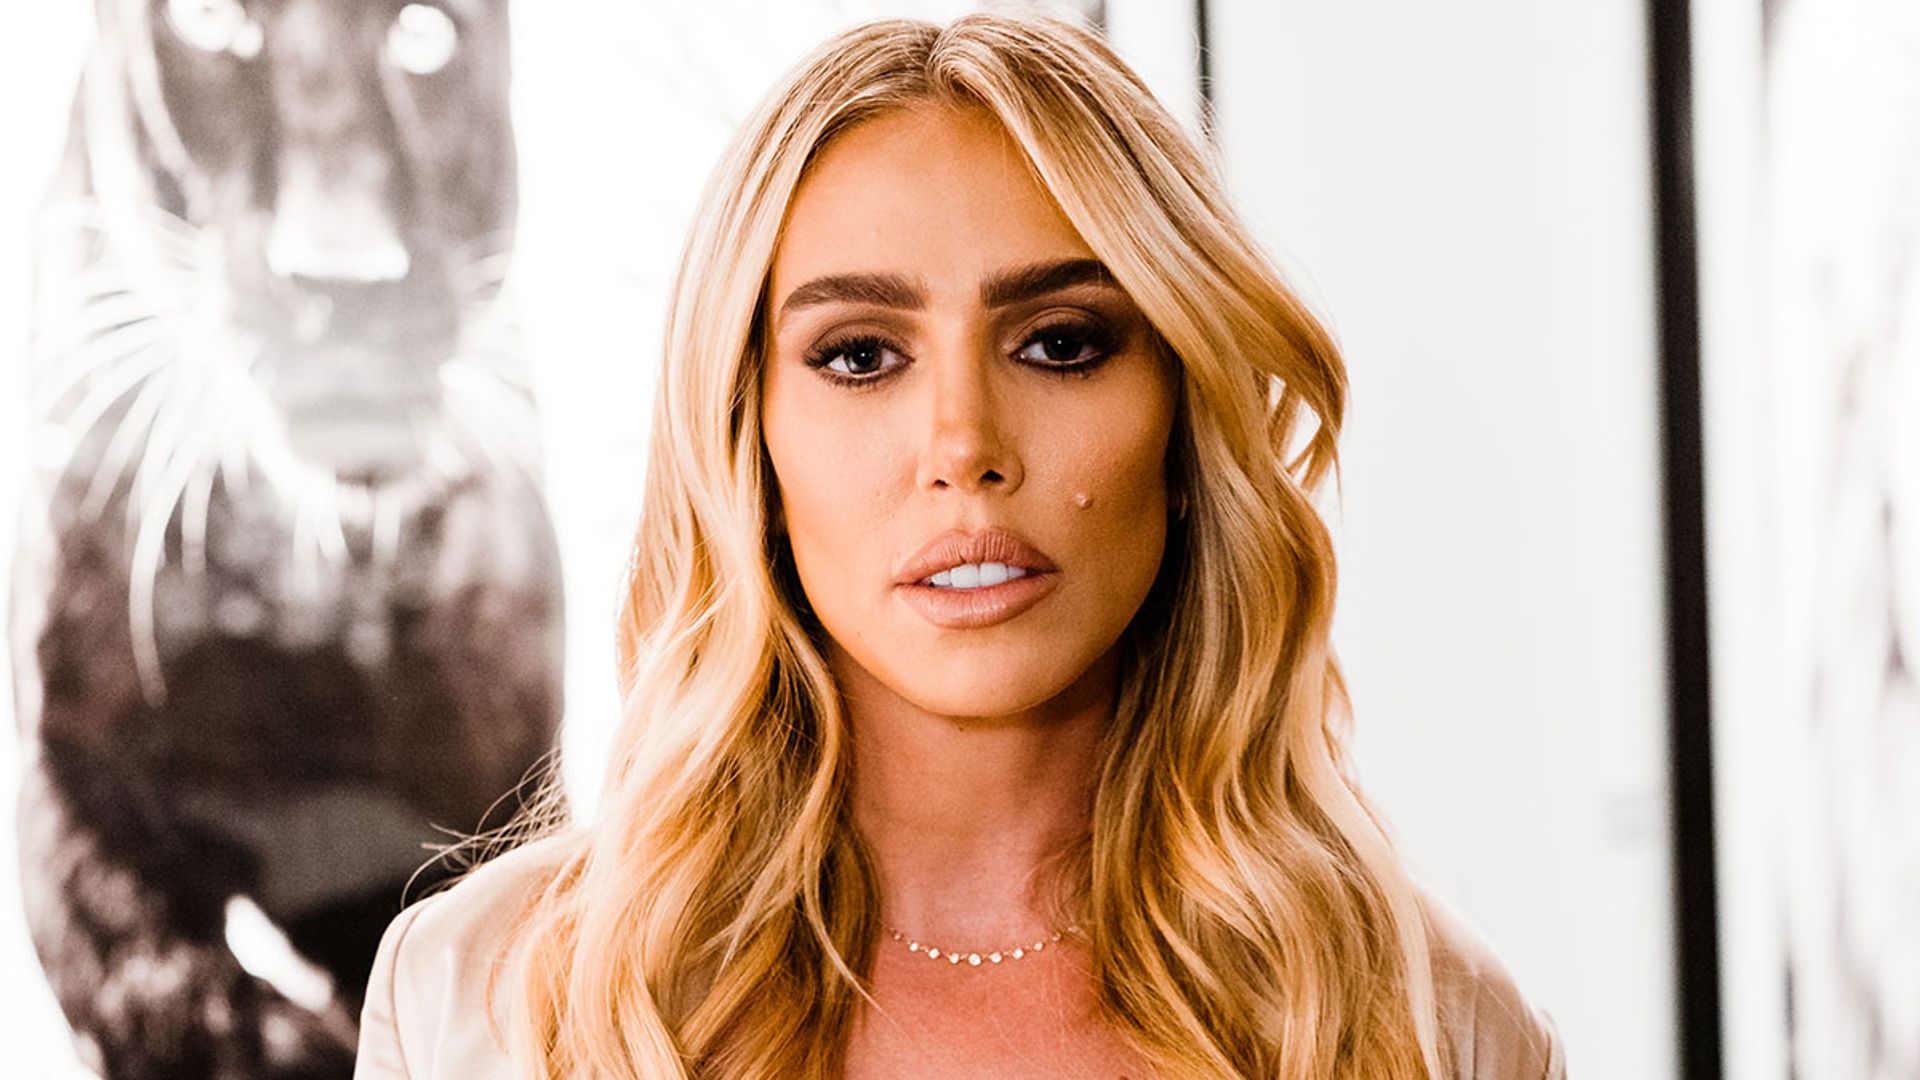 Petra Ecclestone's three wedding dresses were just as beautiful as you'd expect